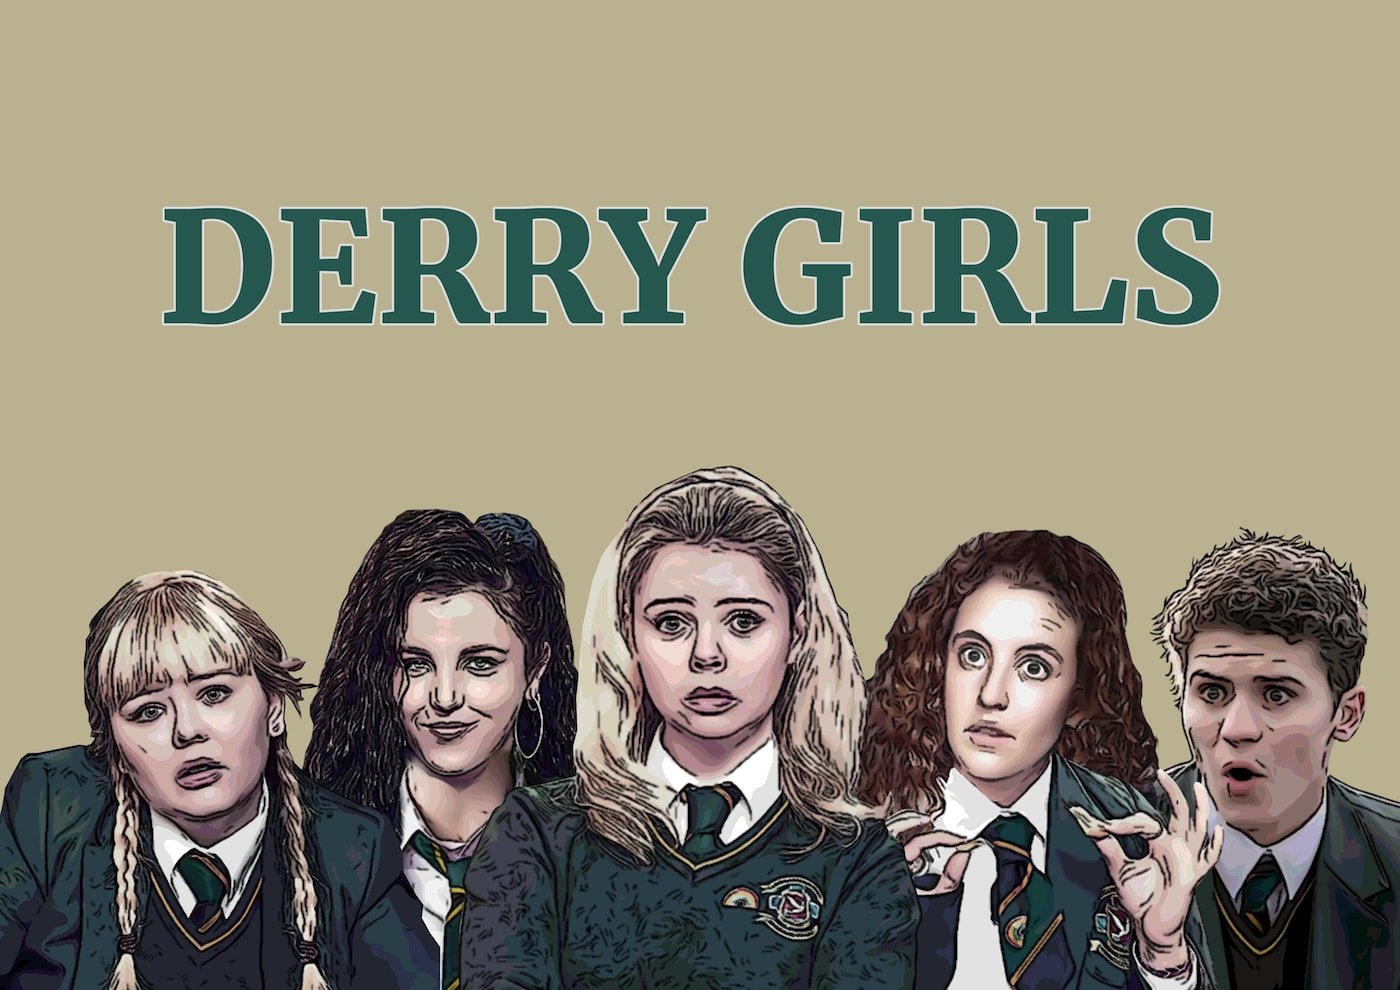 Illustrated poster of the shows "Derry Girls"